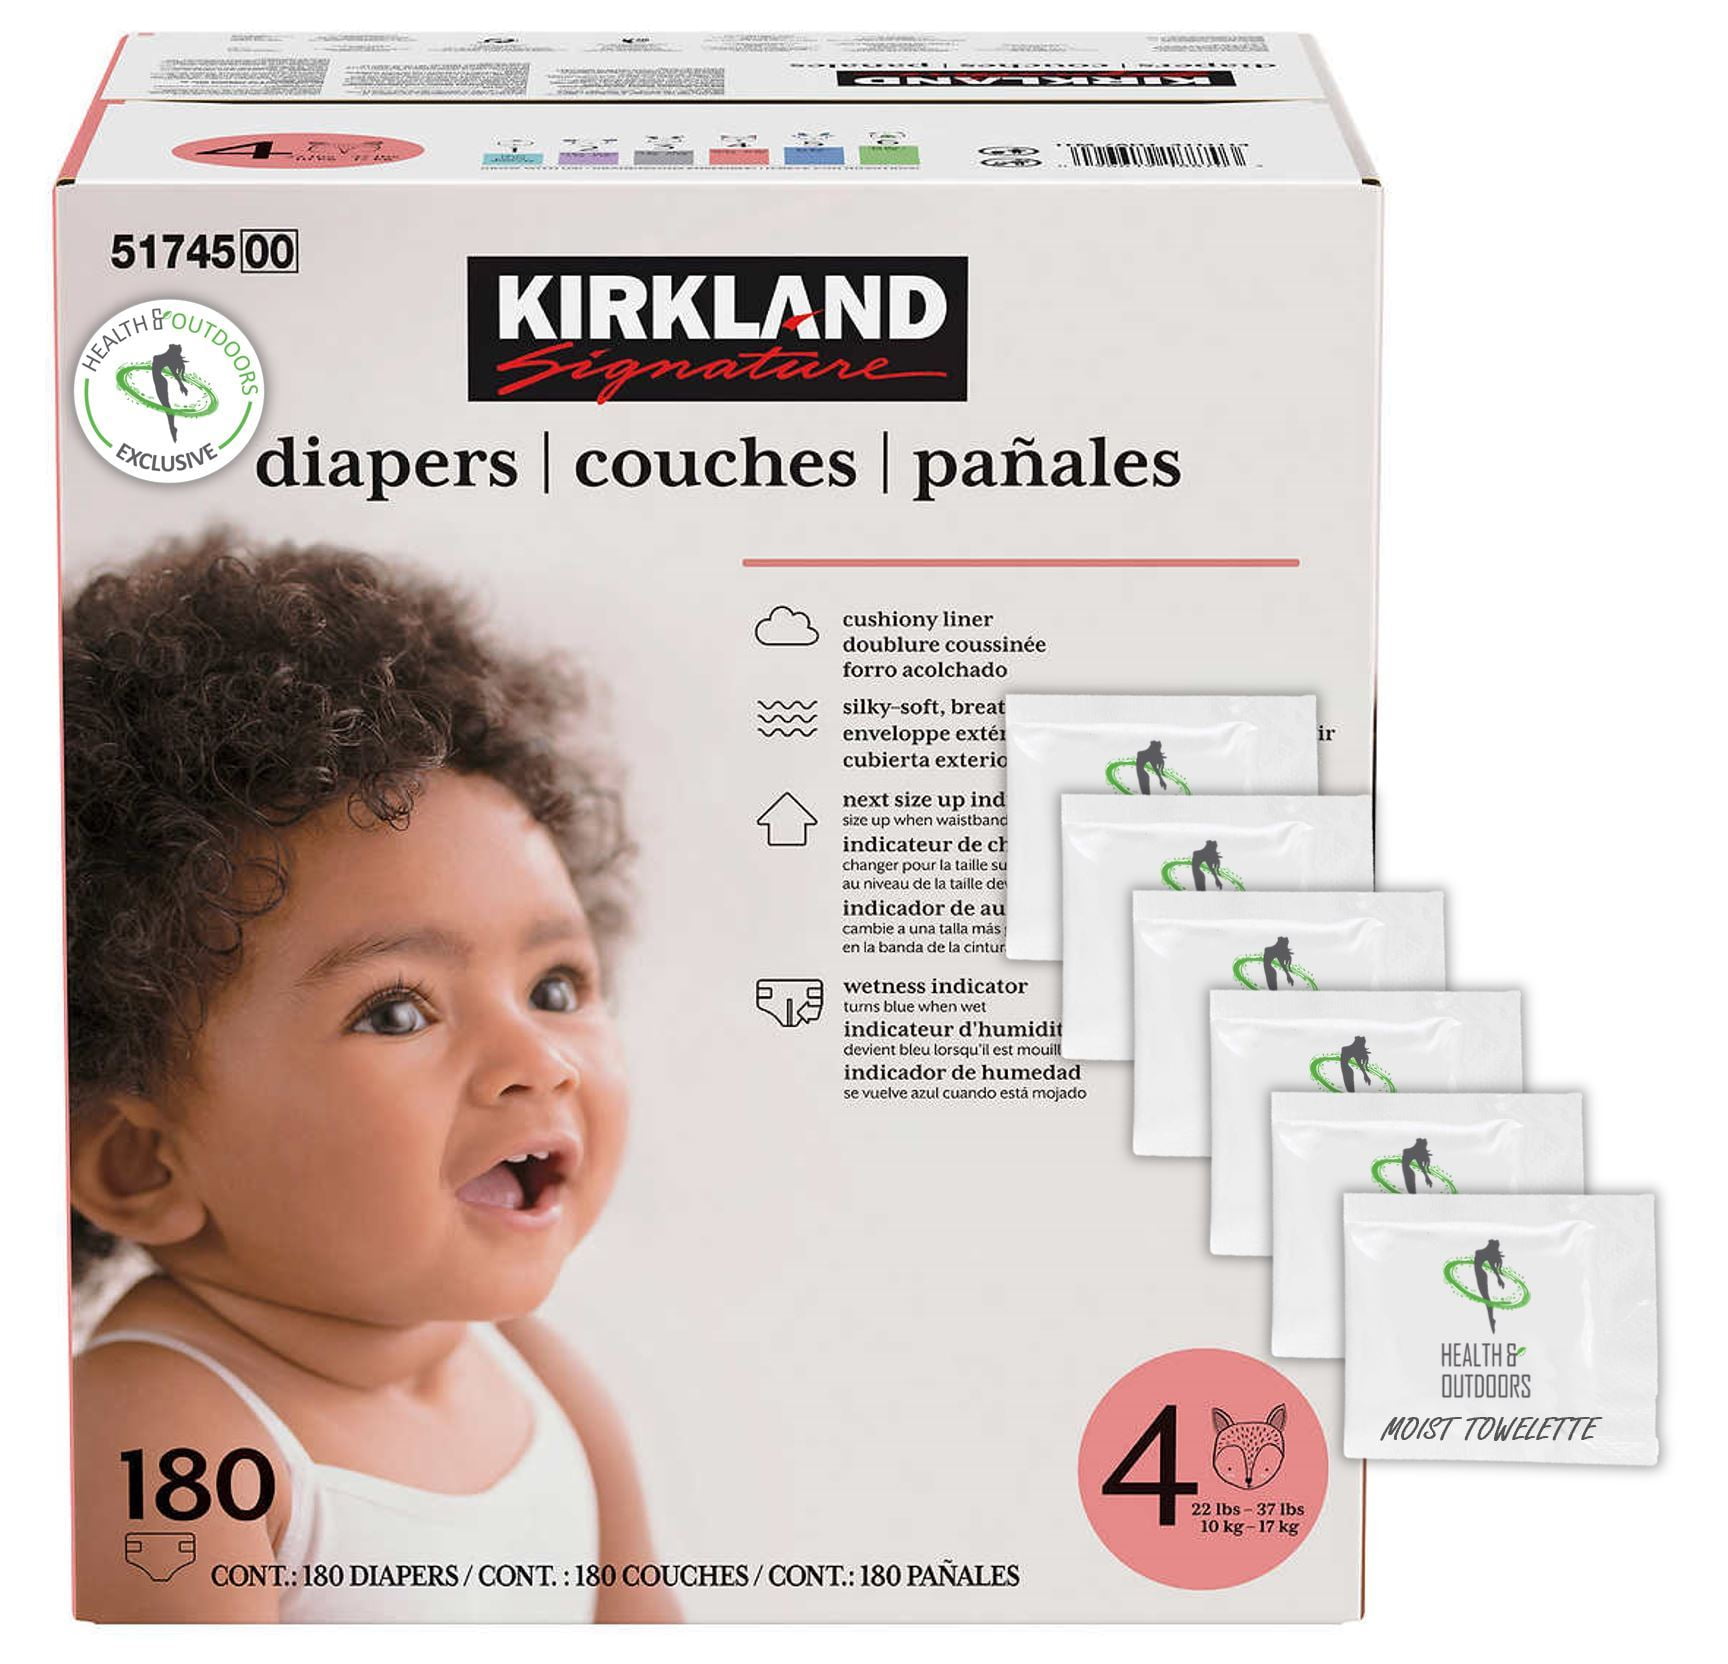 174 Count W/ Exclusive Health and Outdoors Wipes 12lbs - 18 lbs Kirkland Signature Diapers Size 2